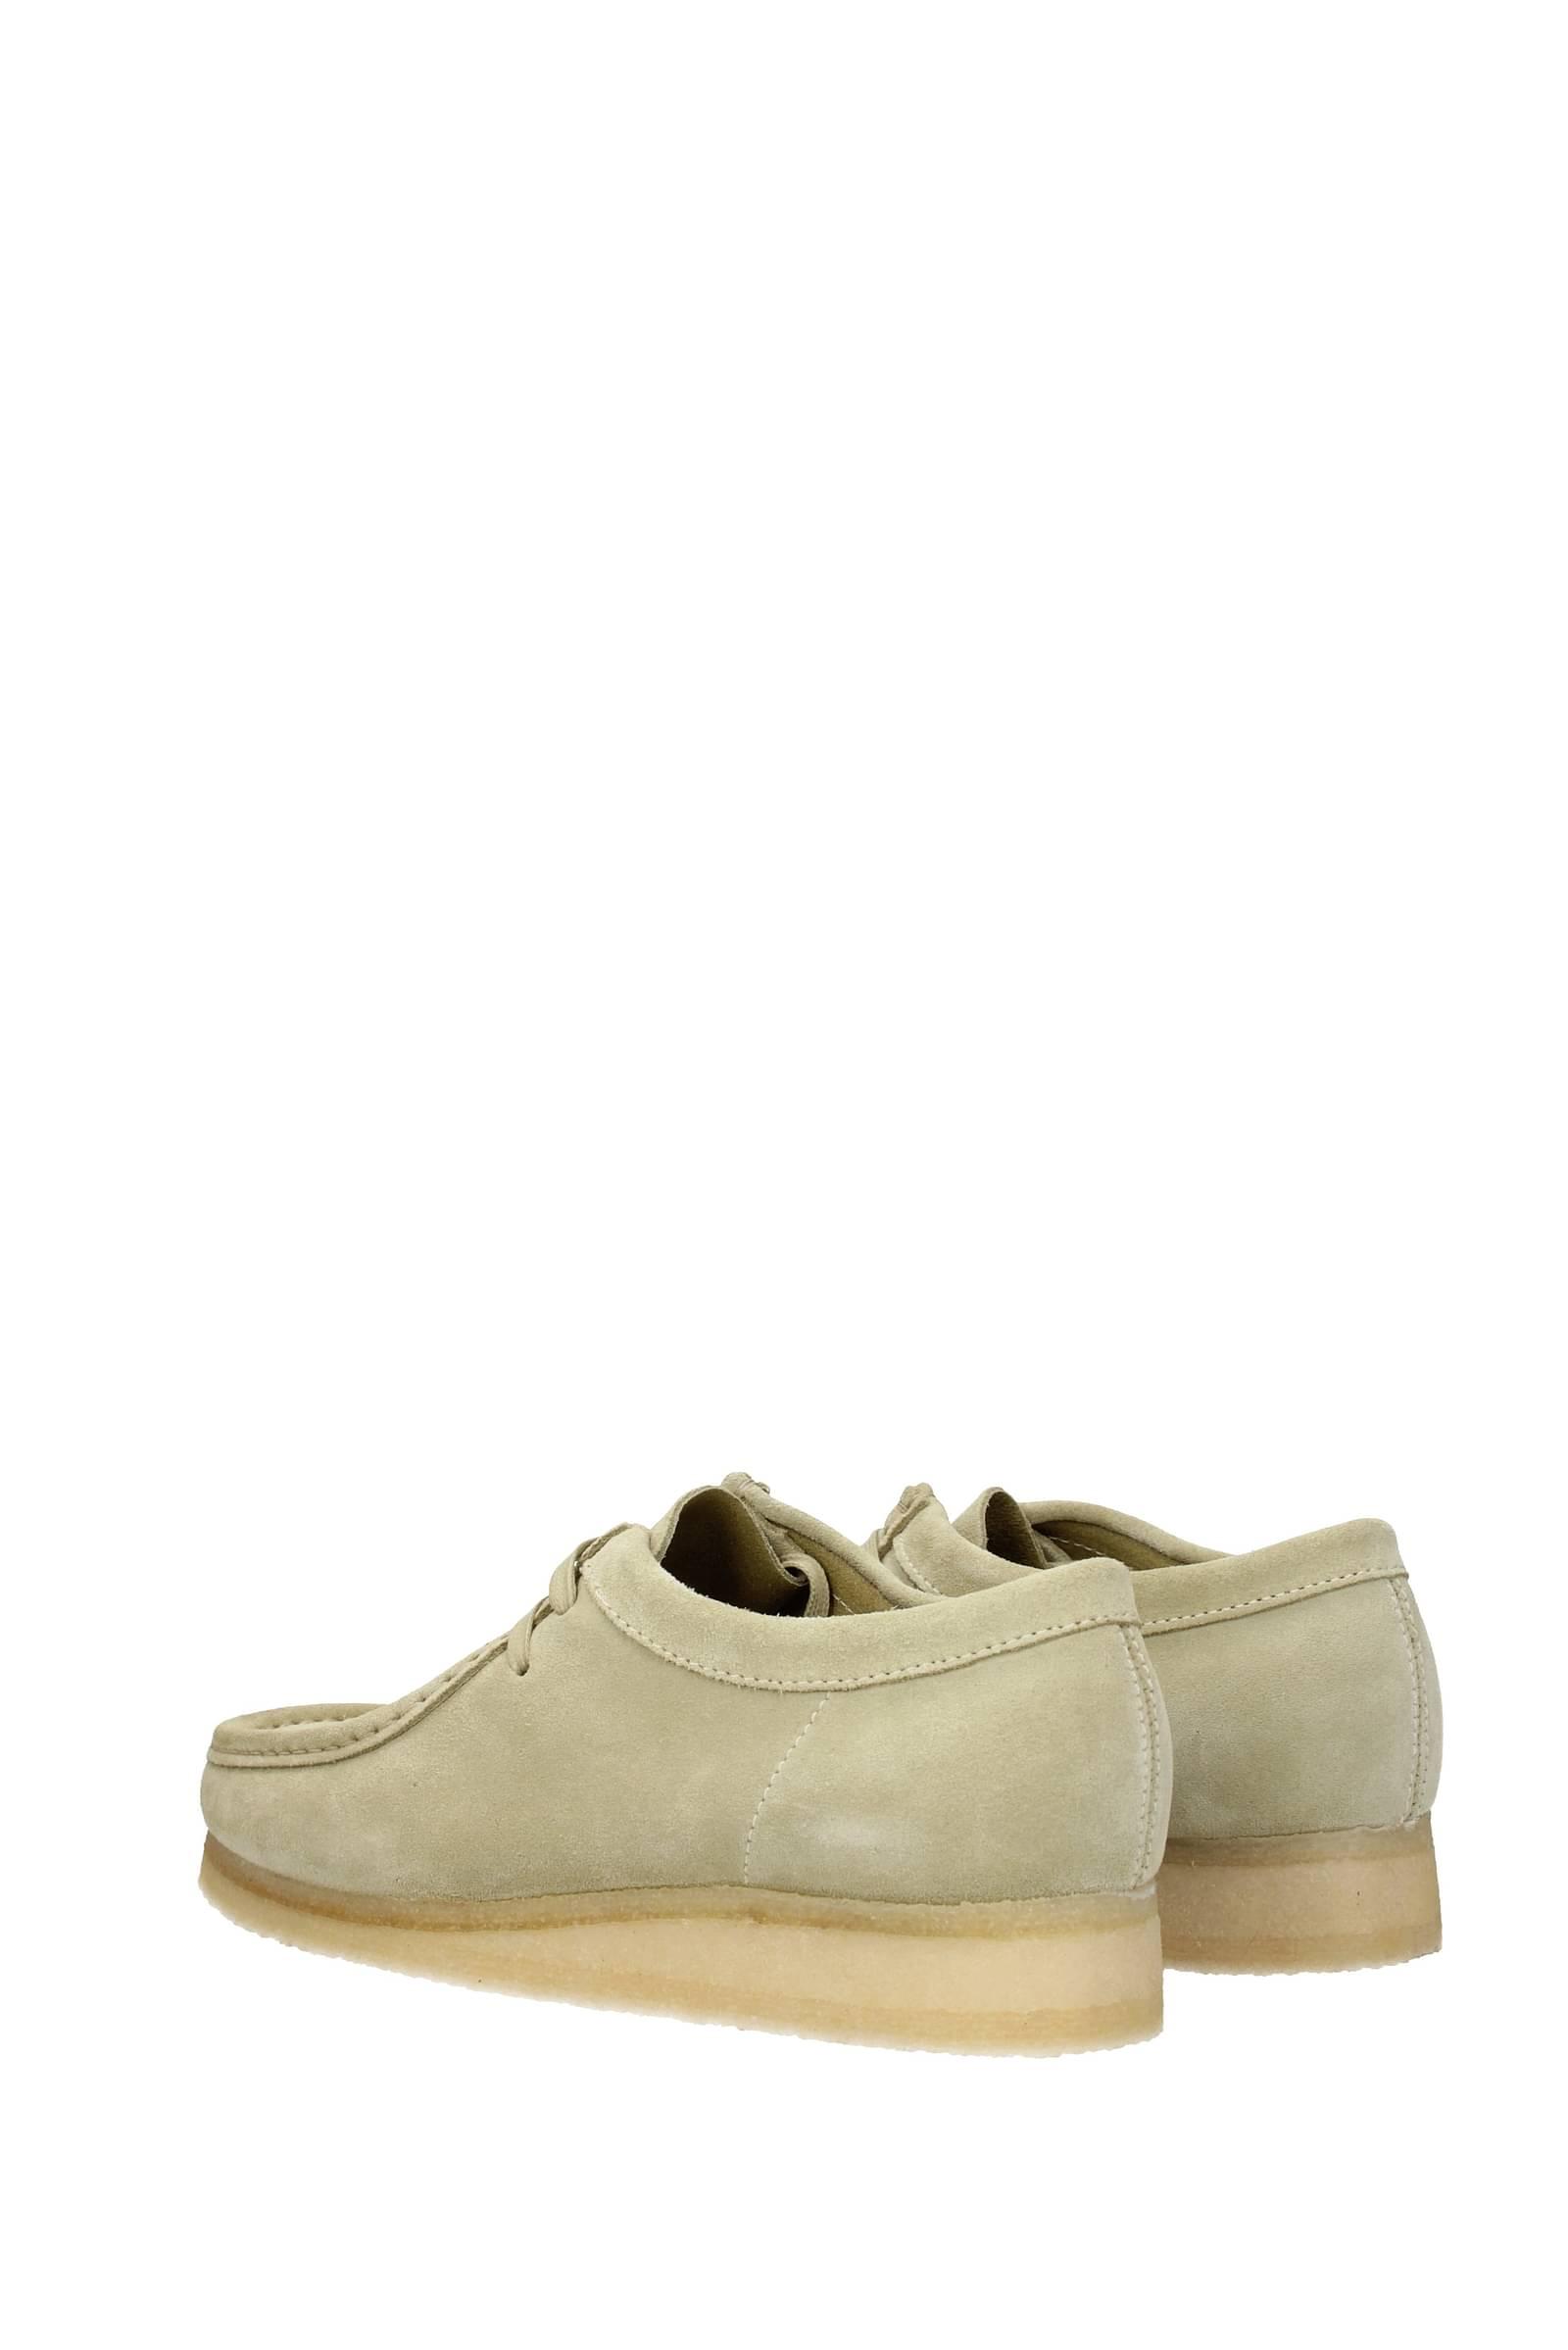 Clarks Wallabee Suede Maple in Natural for | Lyst